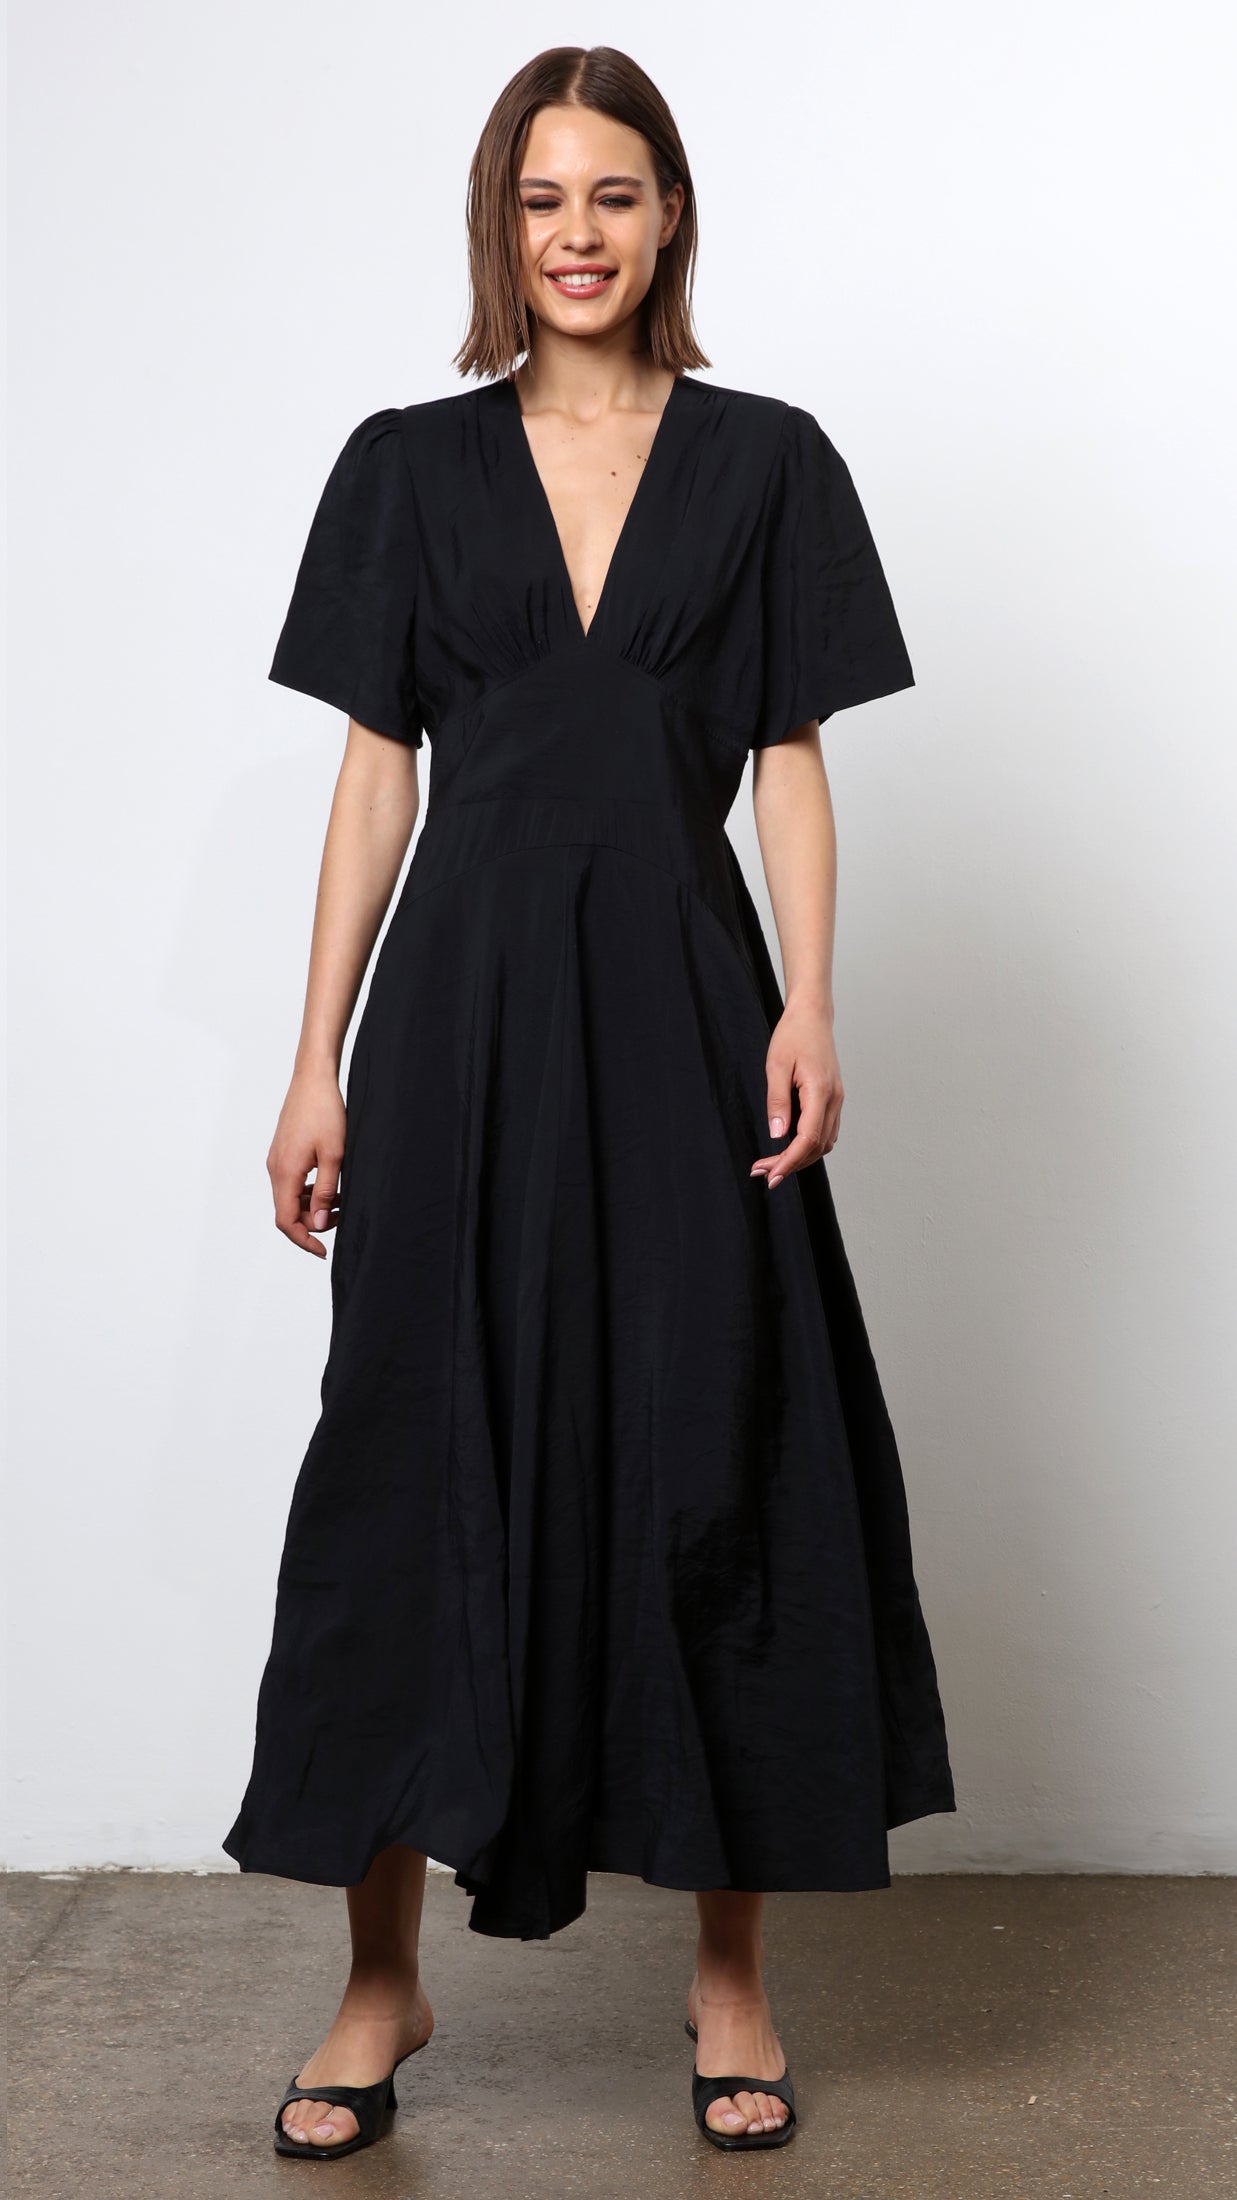 Natural Dress (Black) by Religion